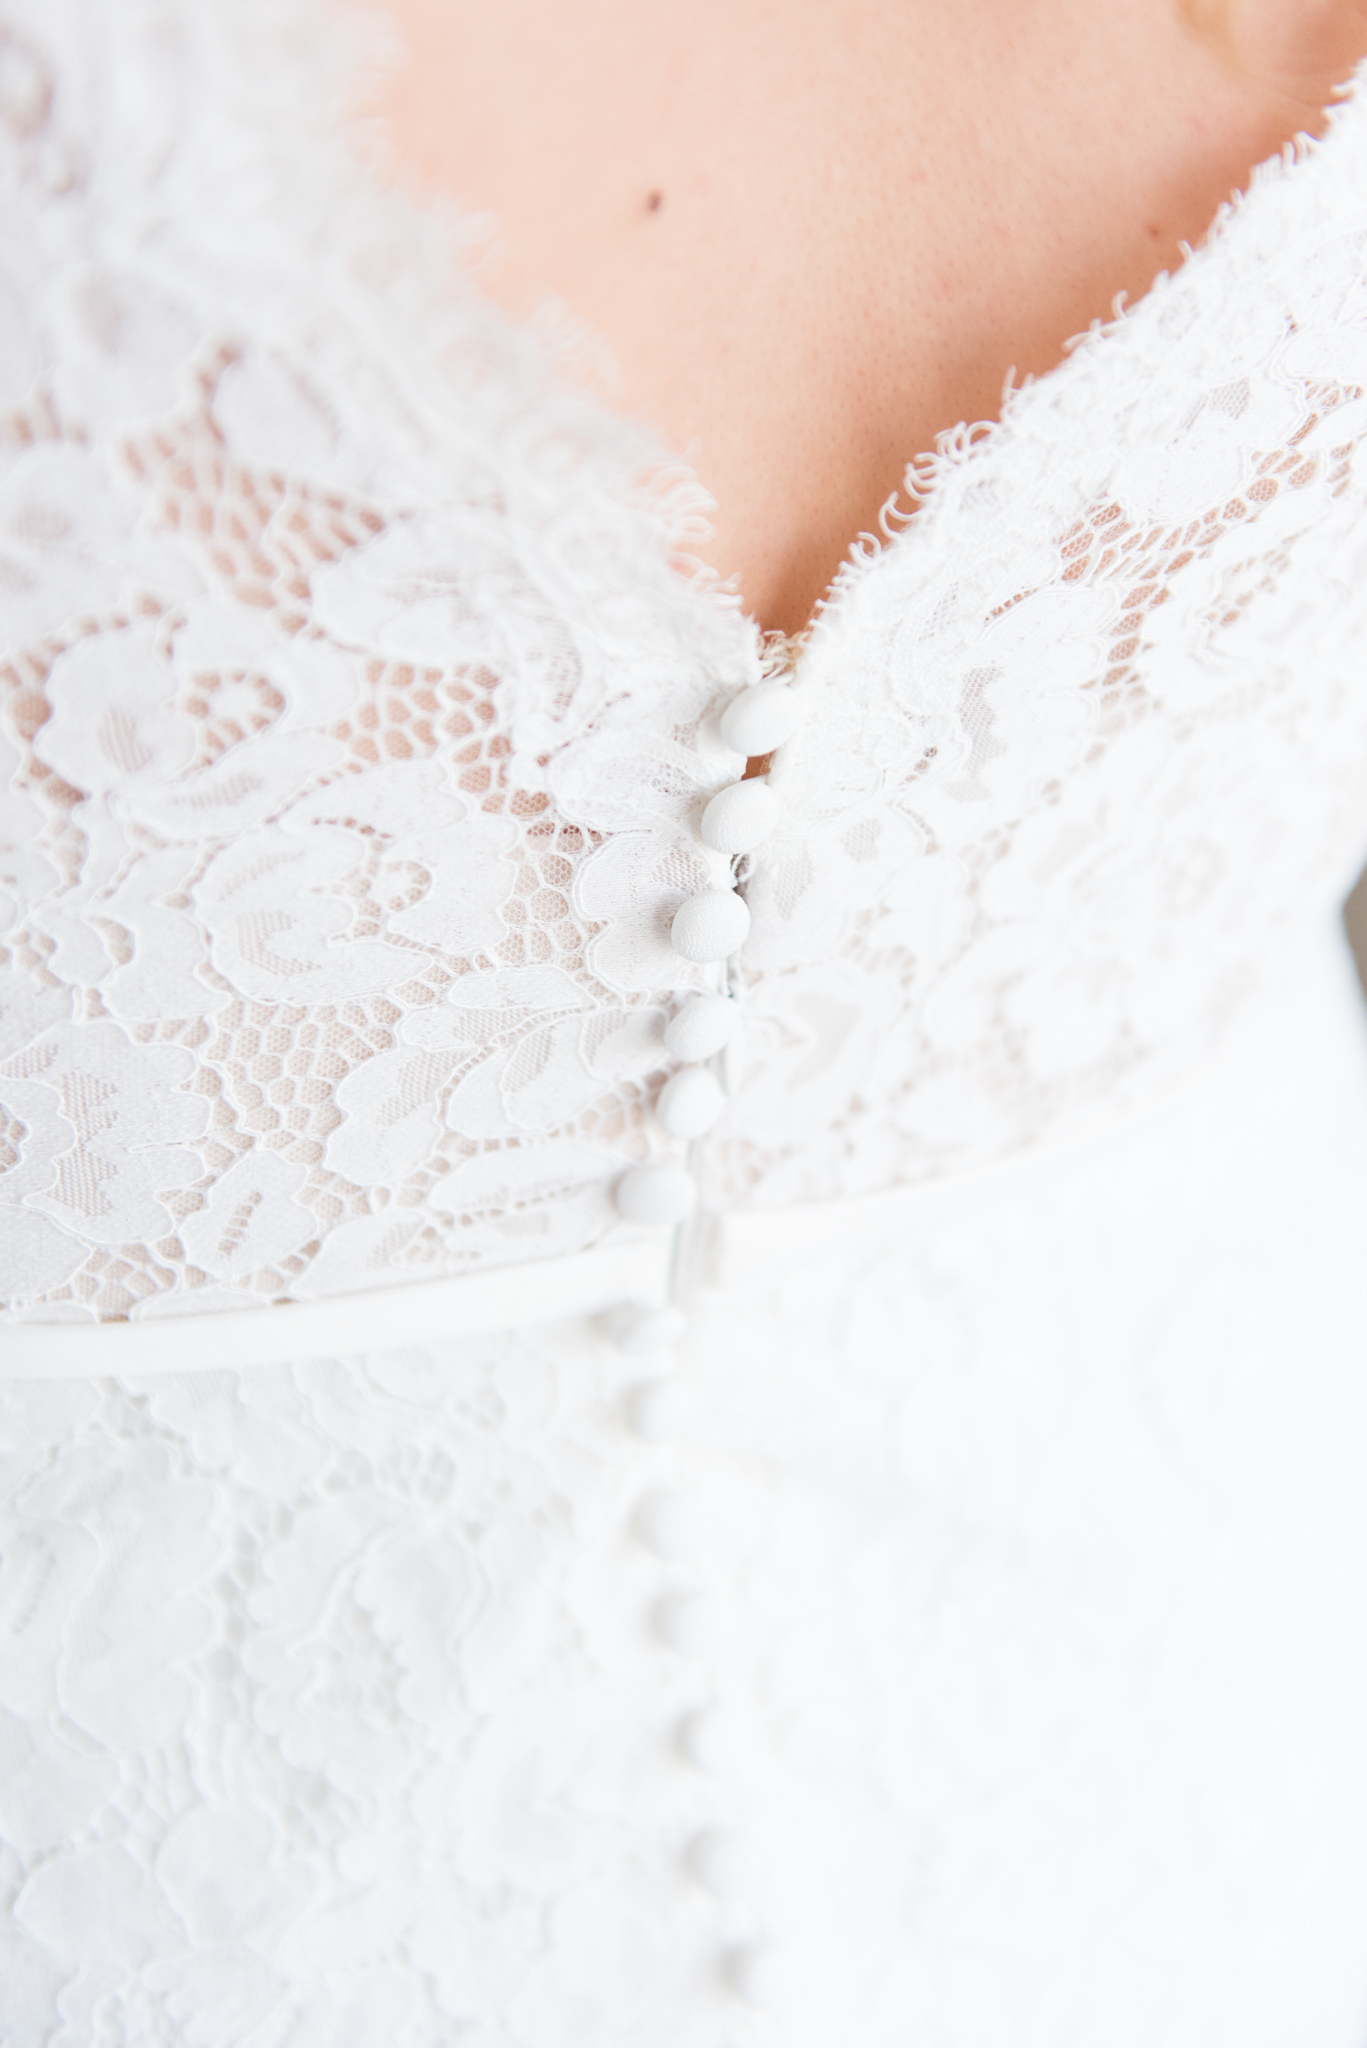 Lace details and buttons of wedding gown.